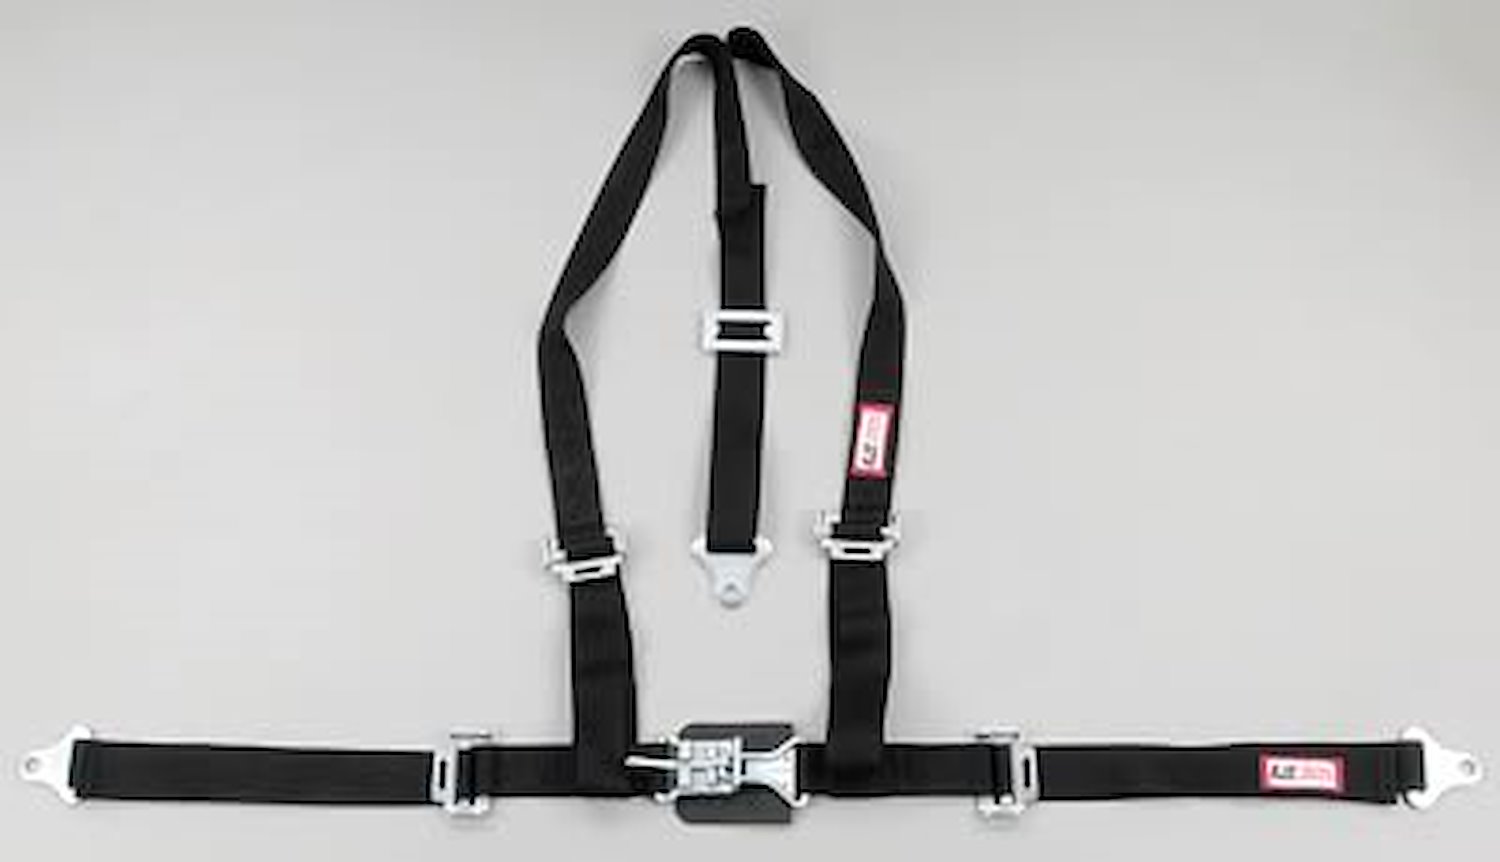 NON-SFI L&L HARNESS 2 PULL UP Lap Belt SEWN IN 2 S.H. Y FLOOR Mount w/STERNUM STRAP ALL WRAP ENDS YELLOW